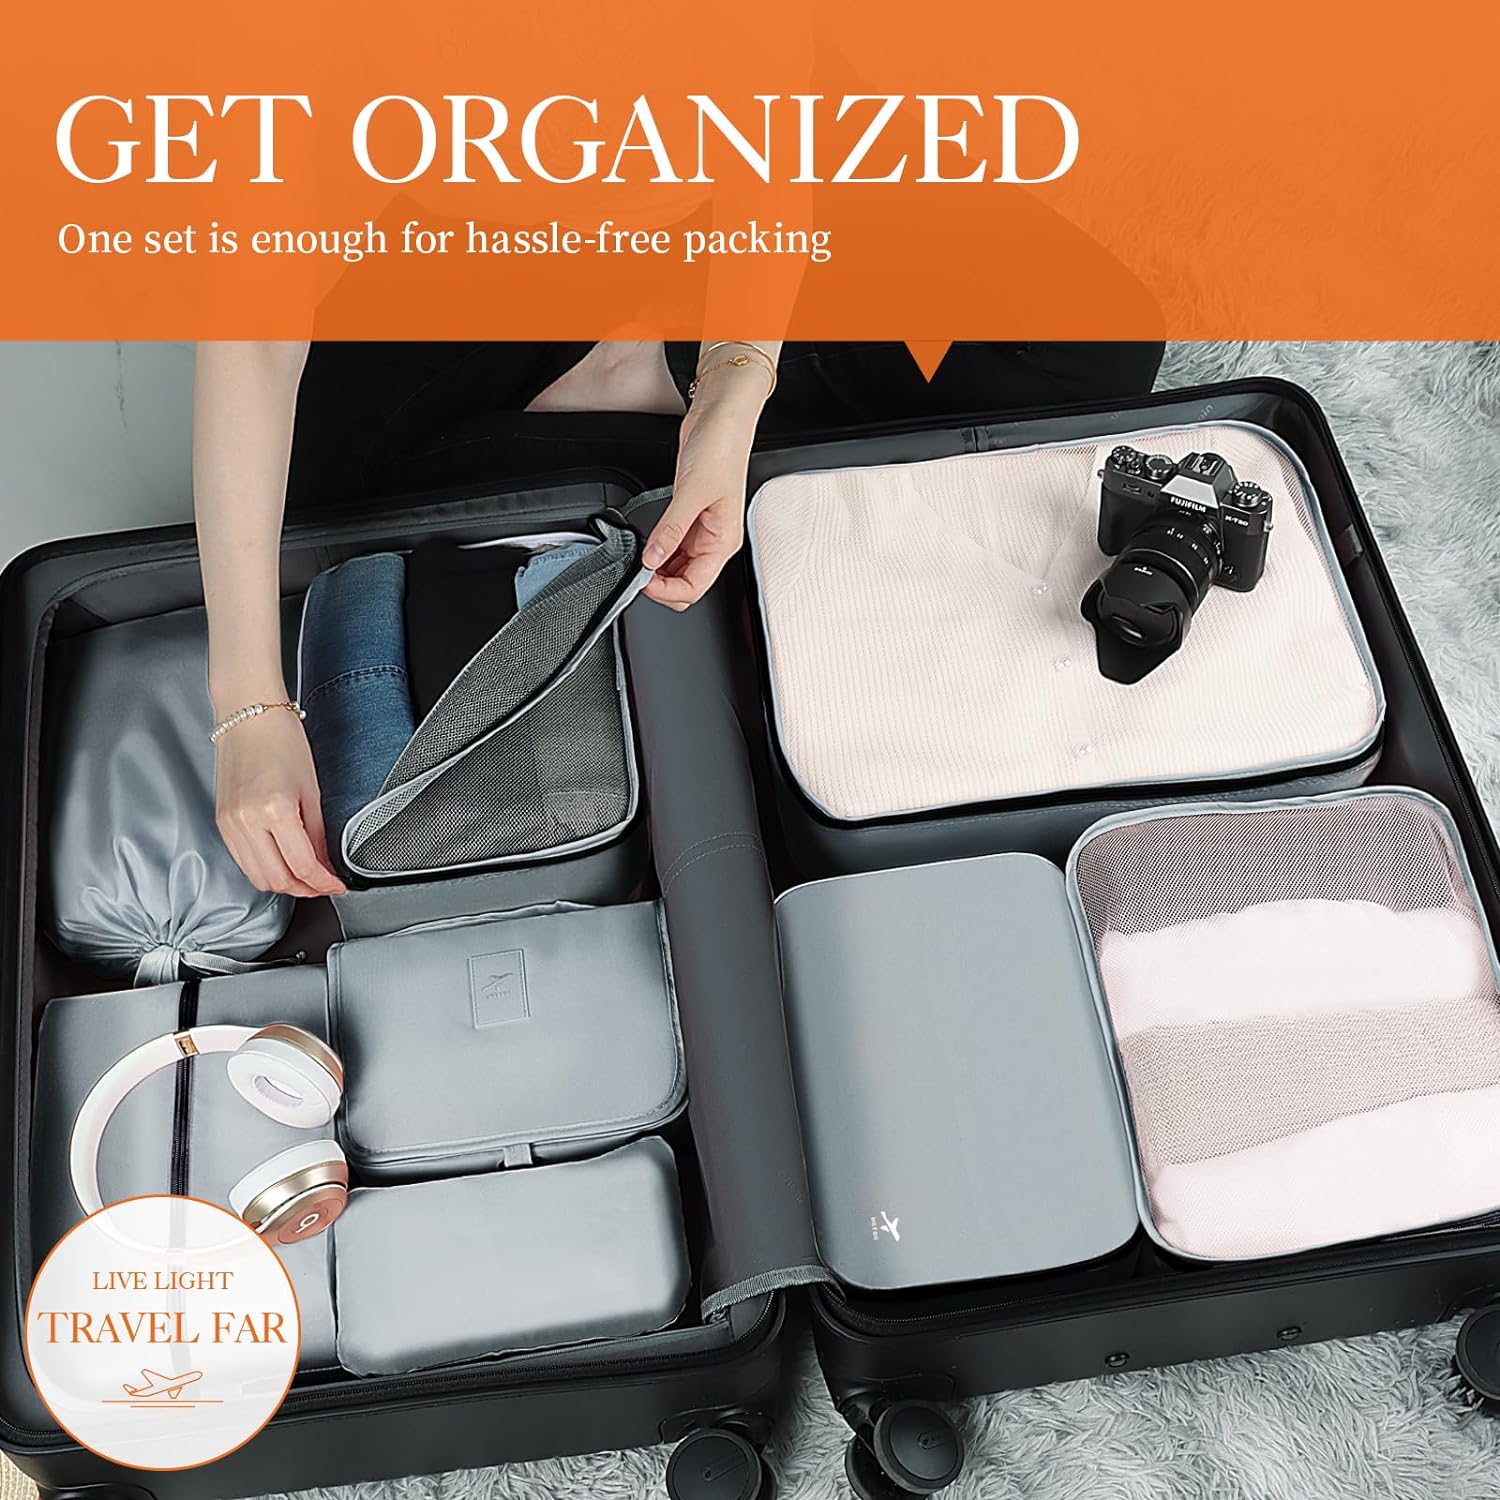 HOTOR Packing Cubes for Suitcases - 8 Pieces, Light Packing Cubes for Travel, Premium Suitcase Organizer Bags Set, Space-Saving Luggage Organizers for Suitcase, Water-Resistant Travel Essentials, Grey